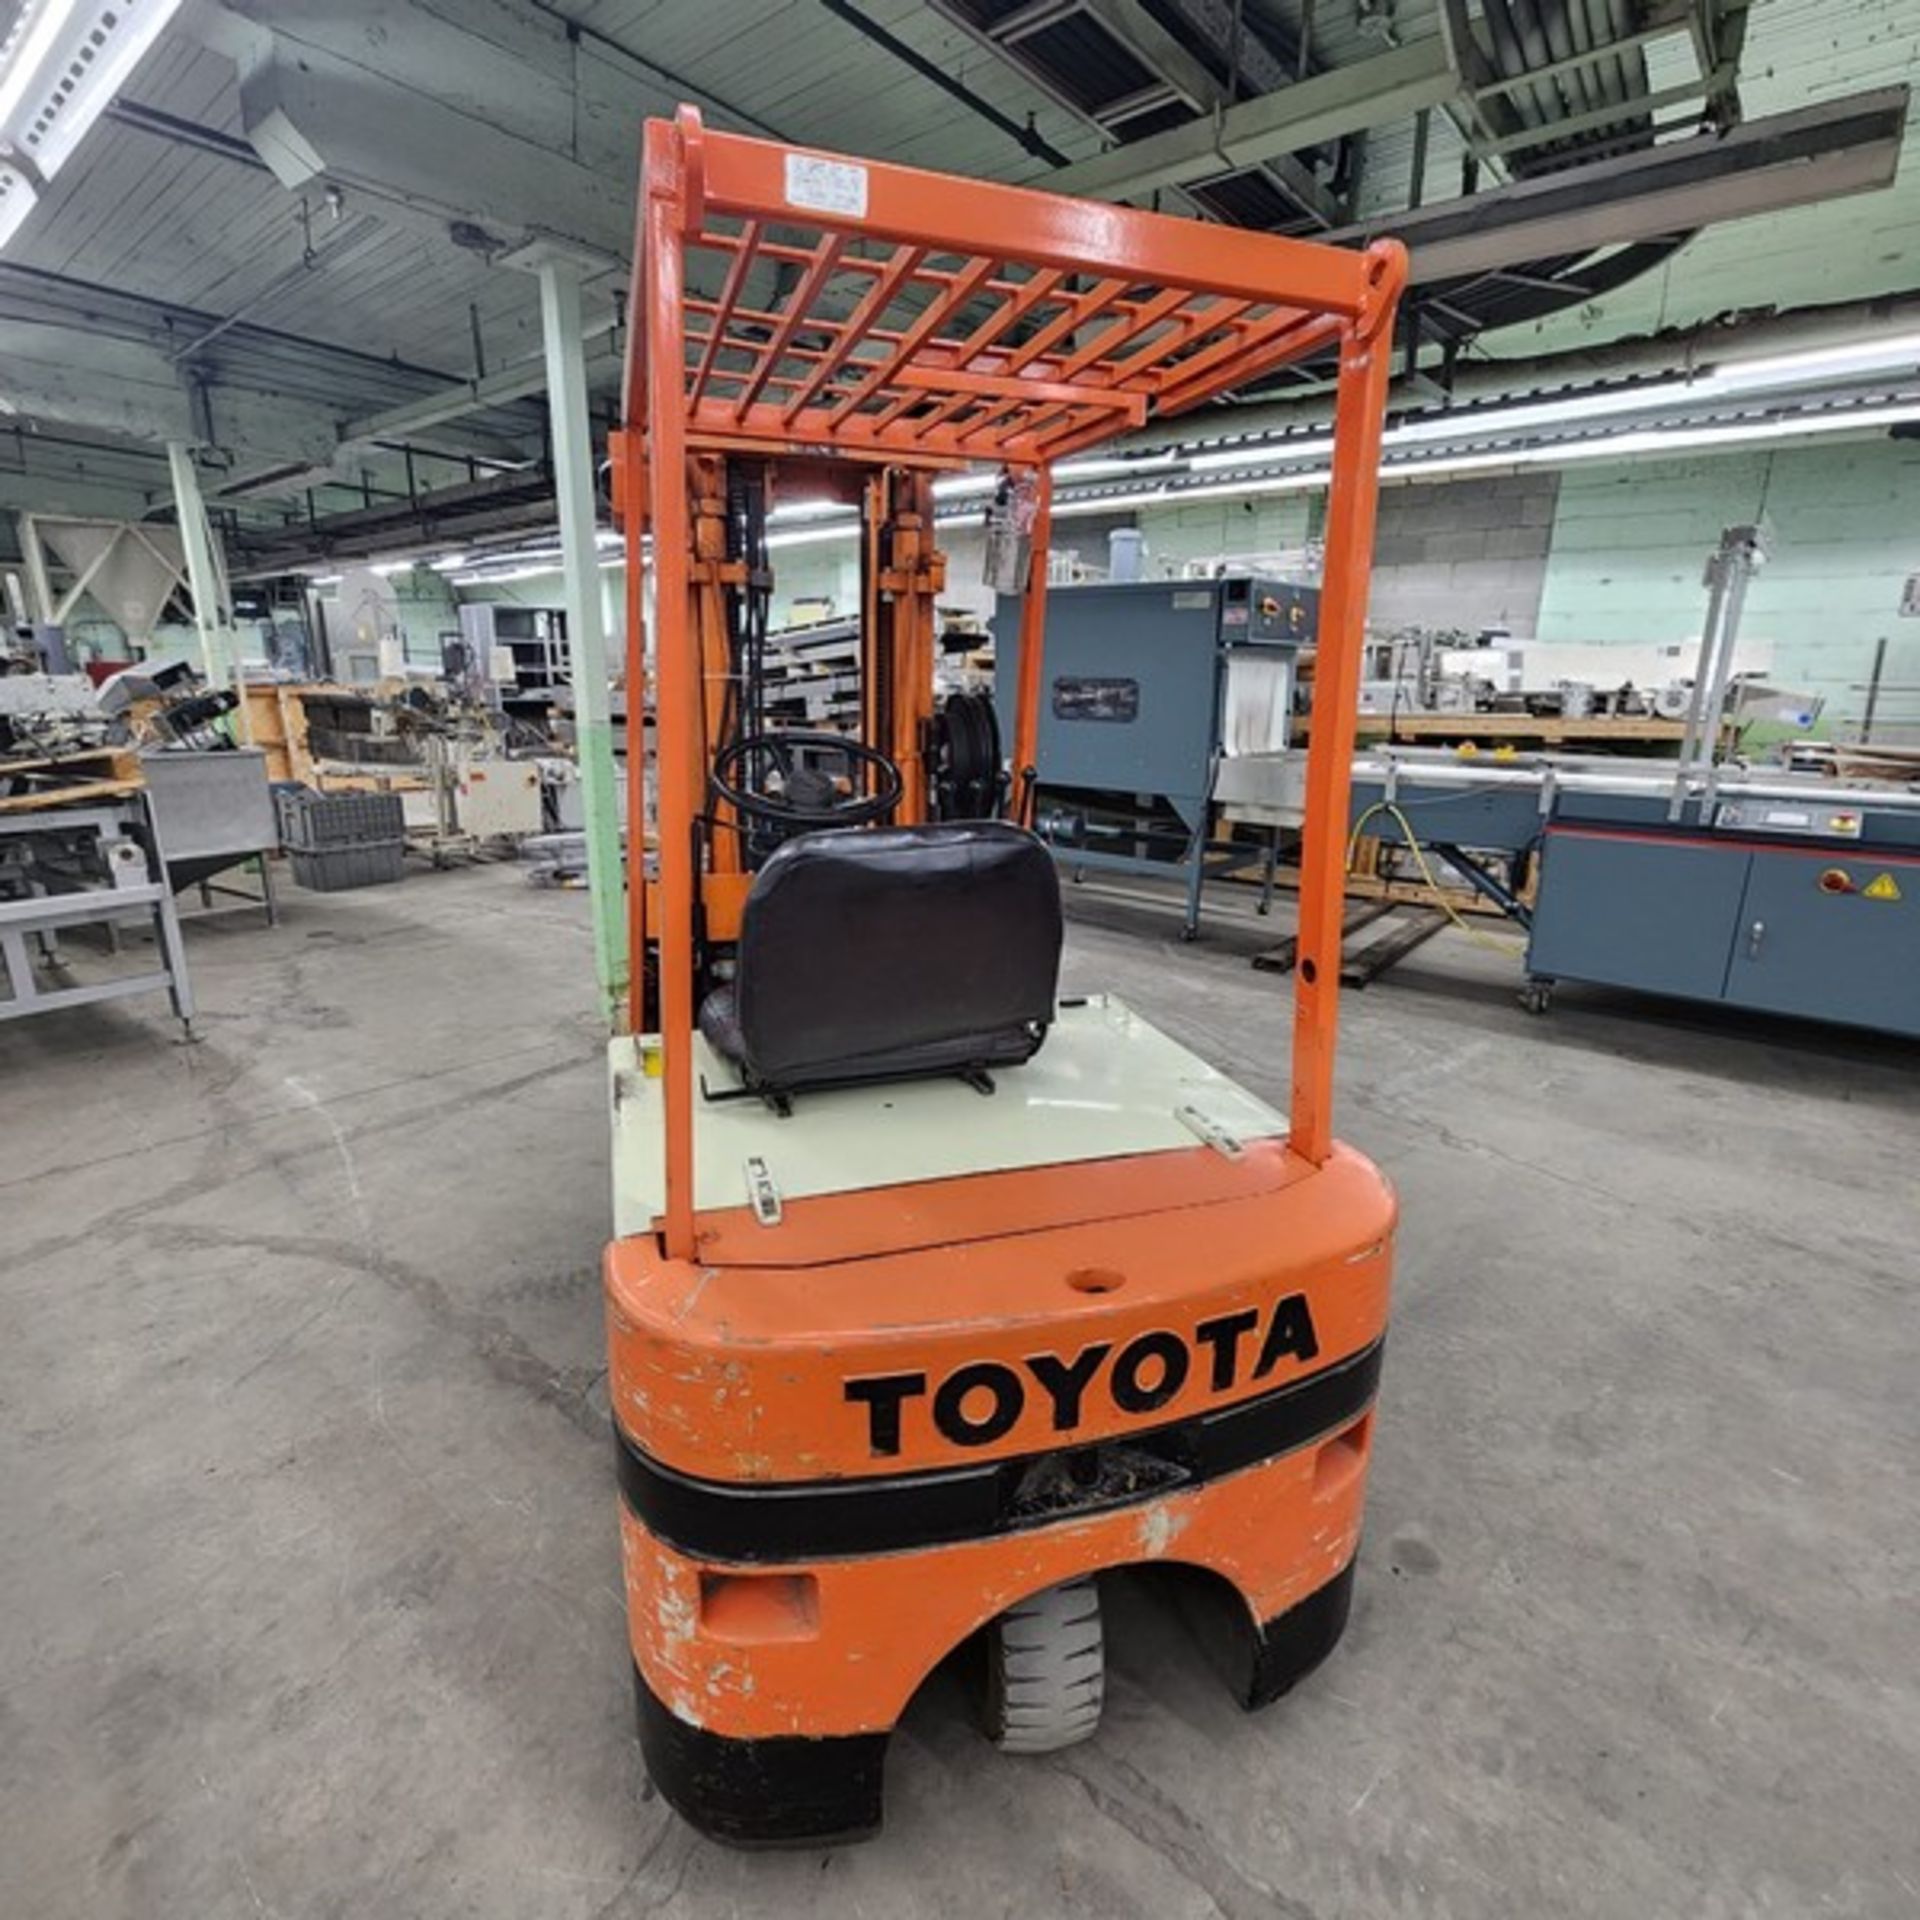 Toyota Electric Fork Lift Truck, Model MCLX23, 2600 lb Capacity. (Located Montreal) (Loading Fee $ - Image 2 of 10